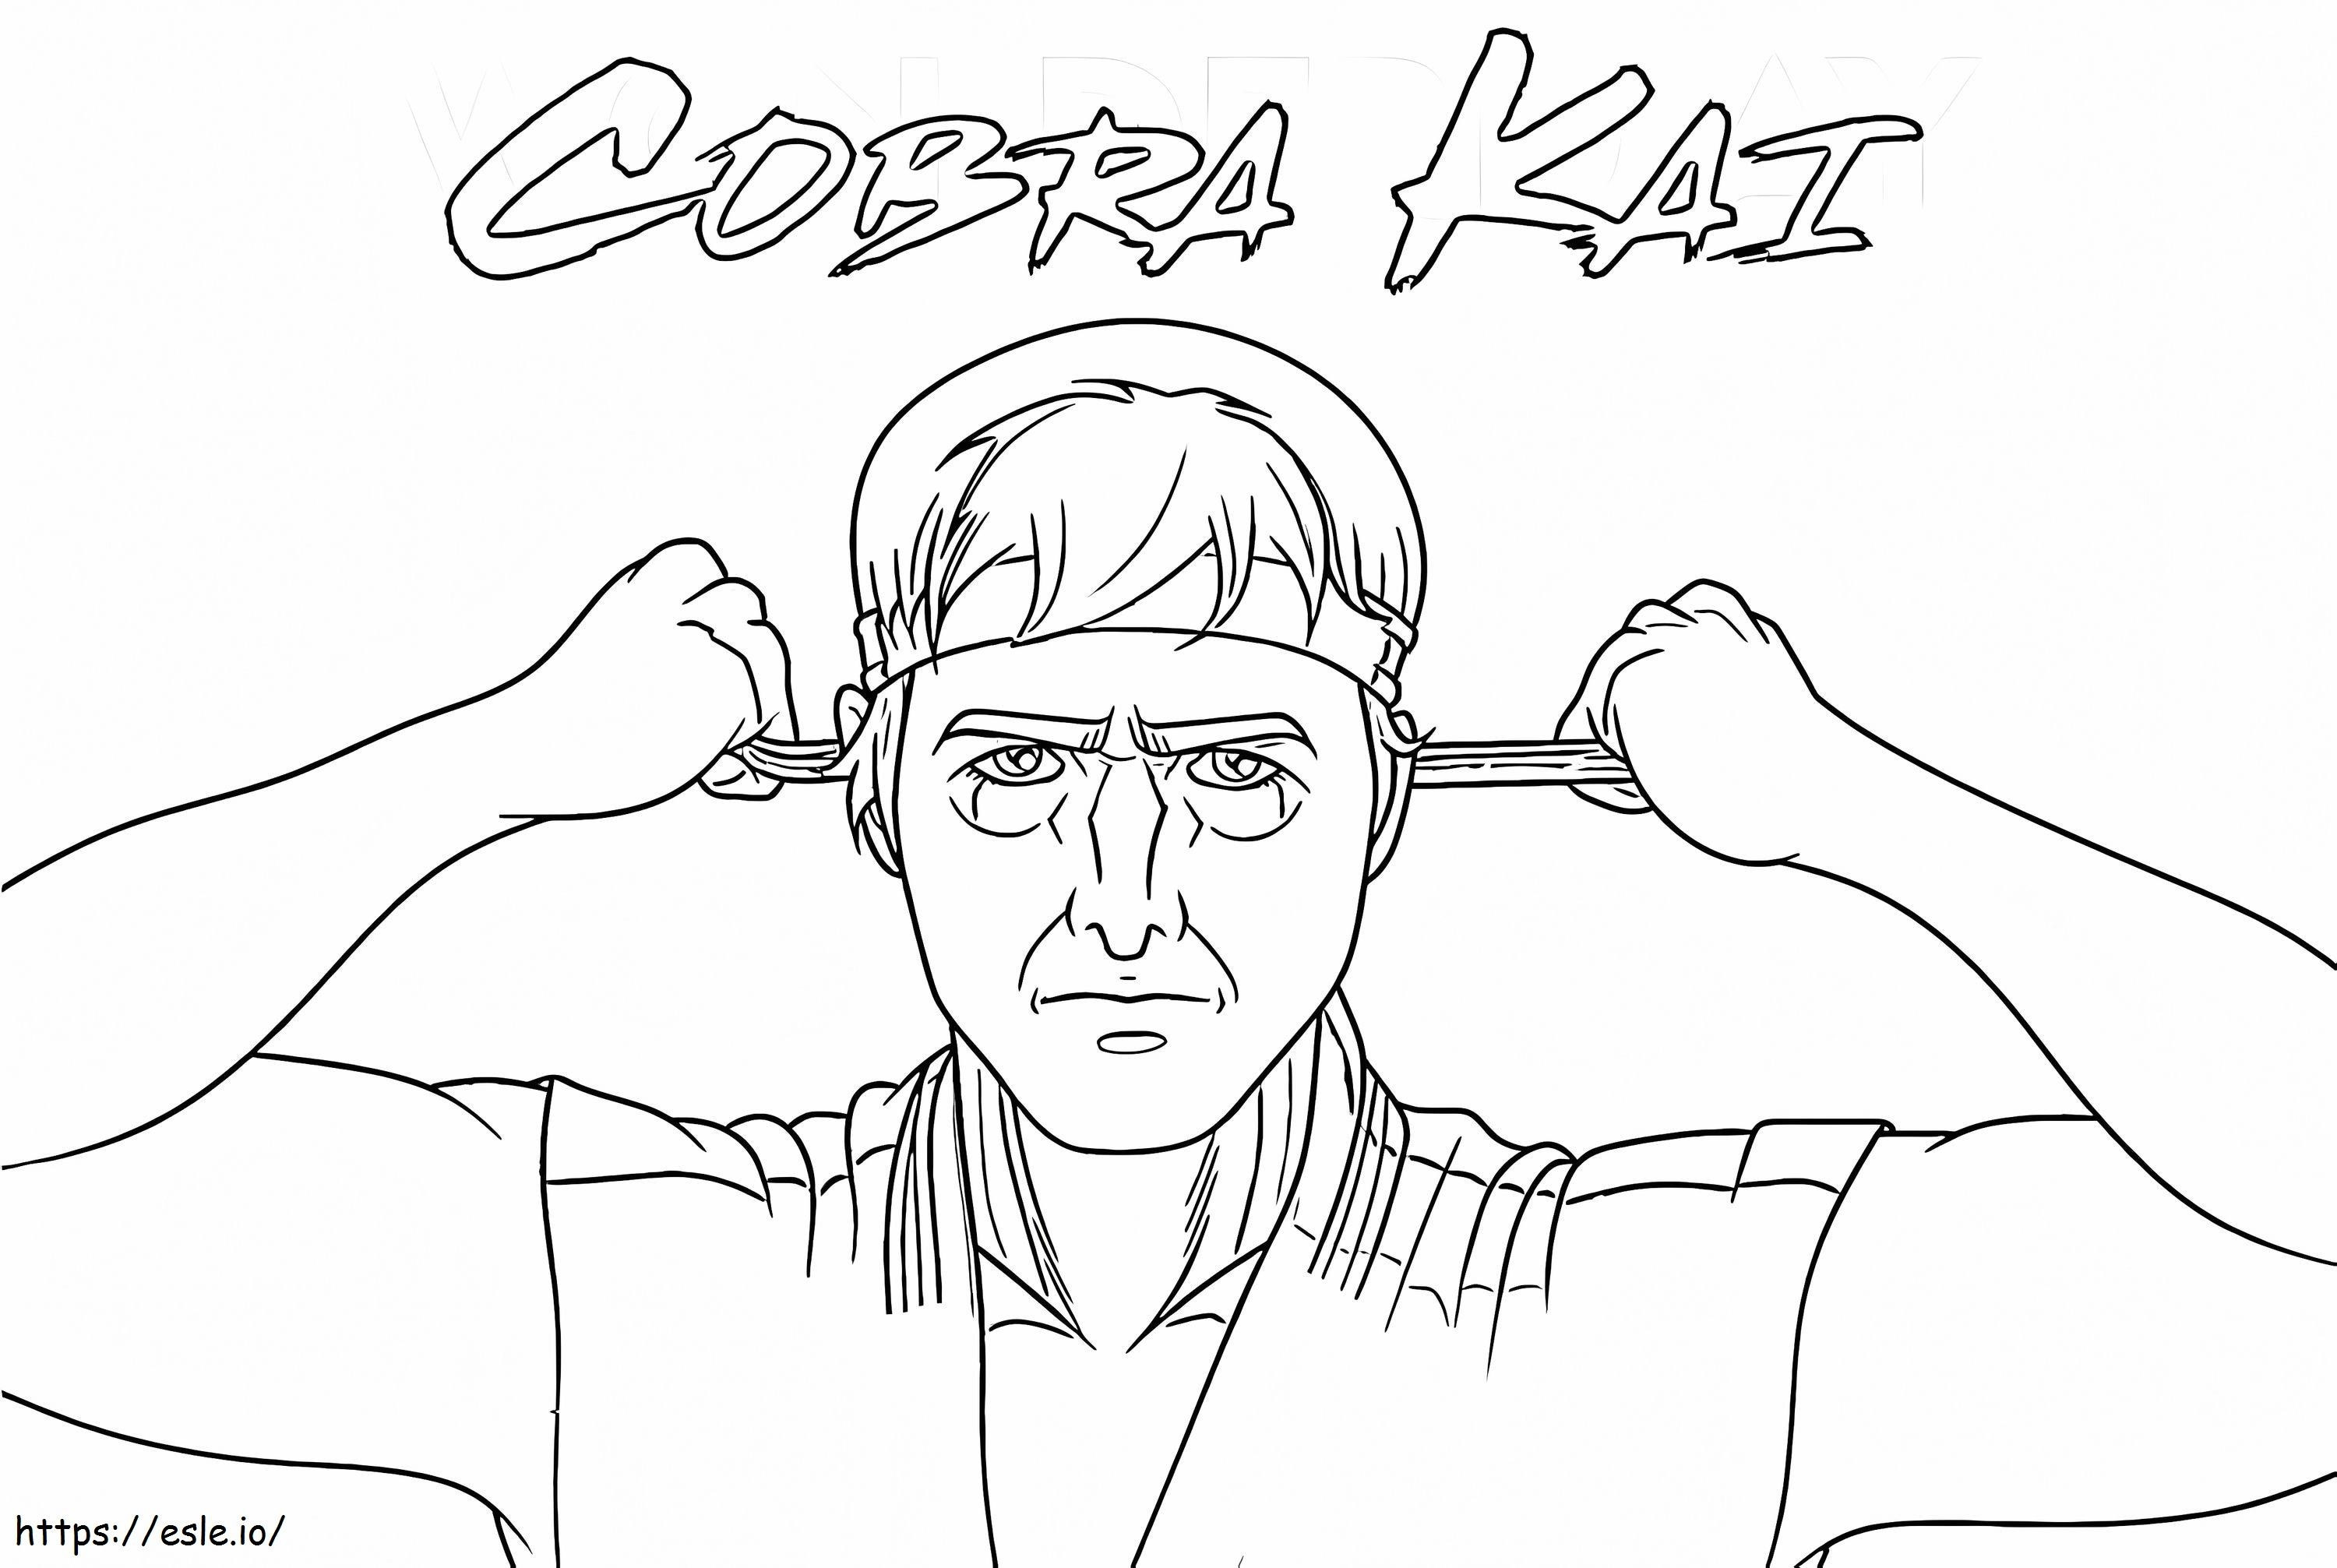 Johnny Lawrence coloring page